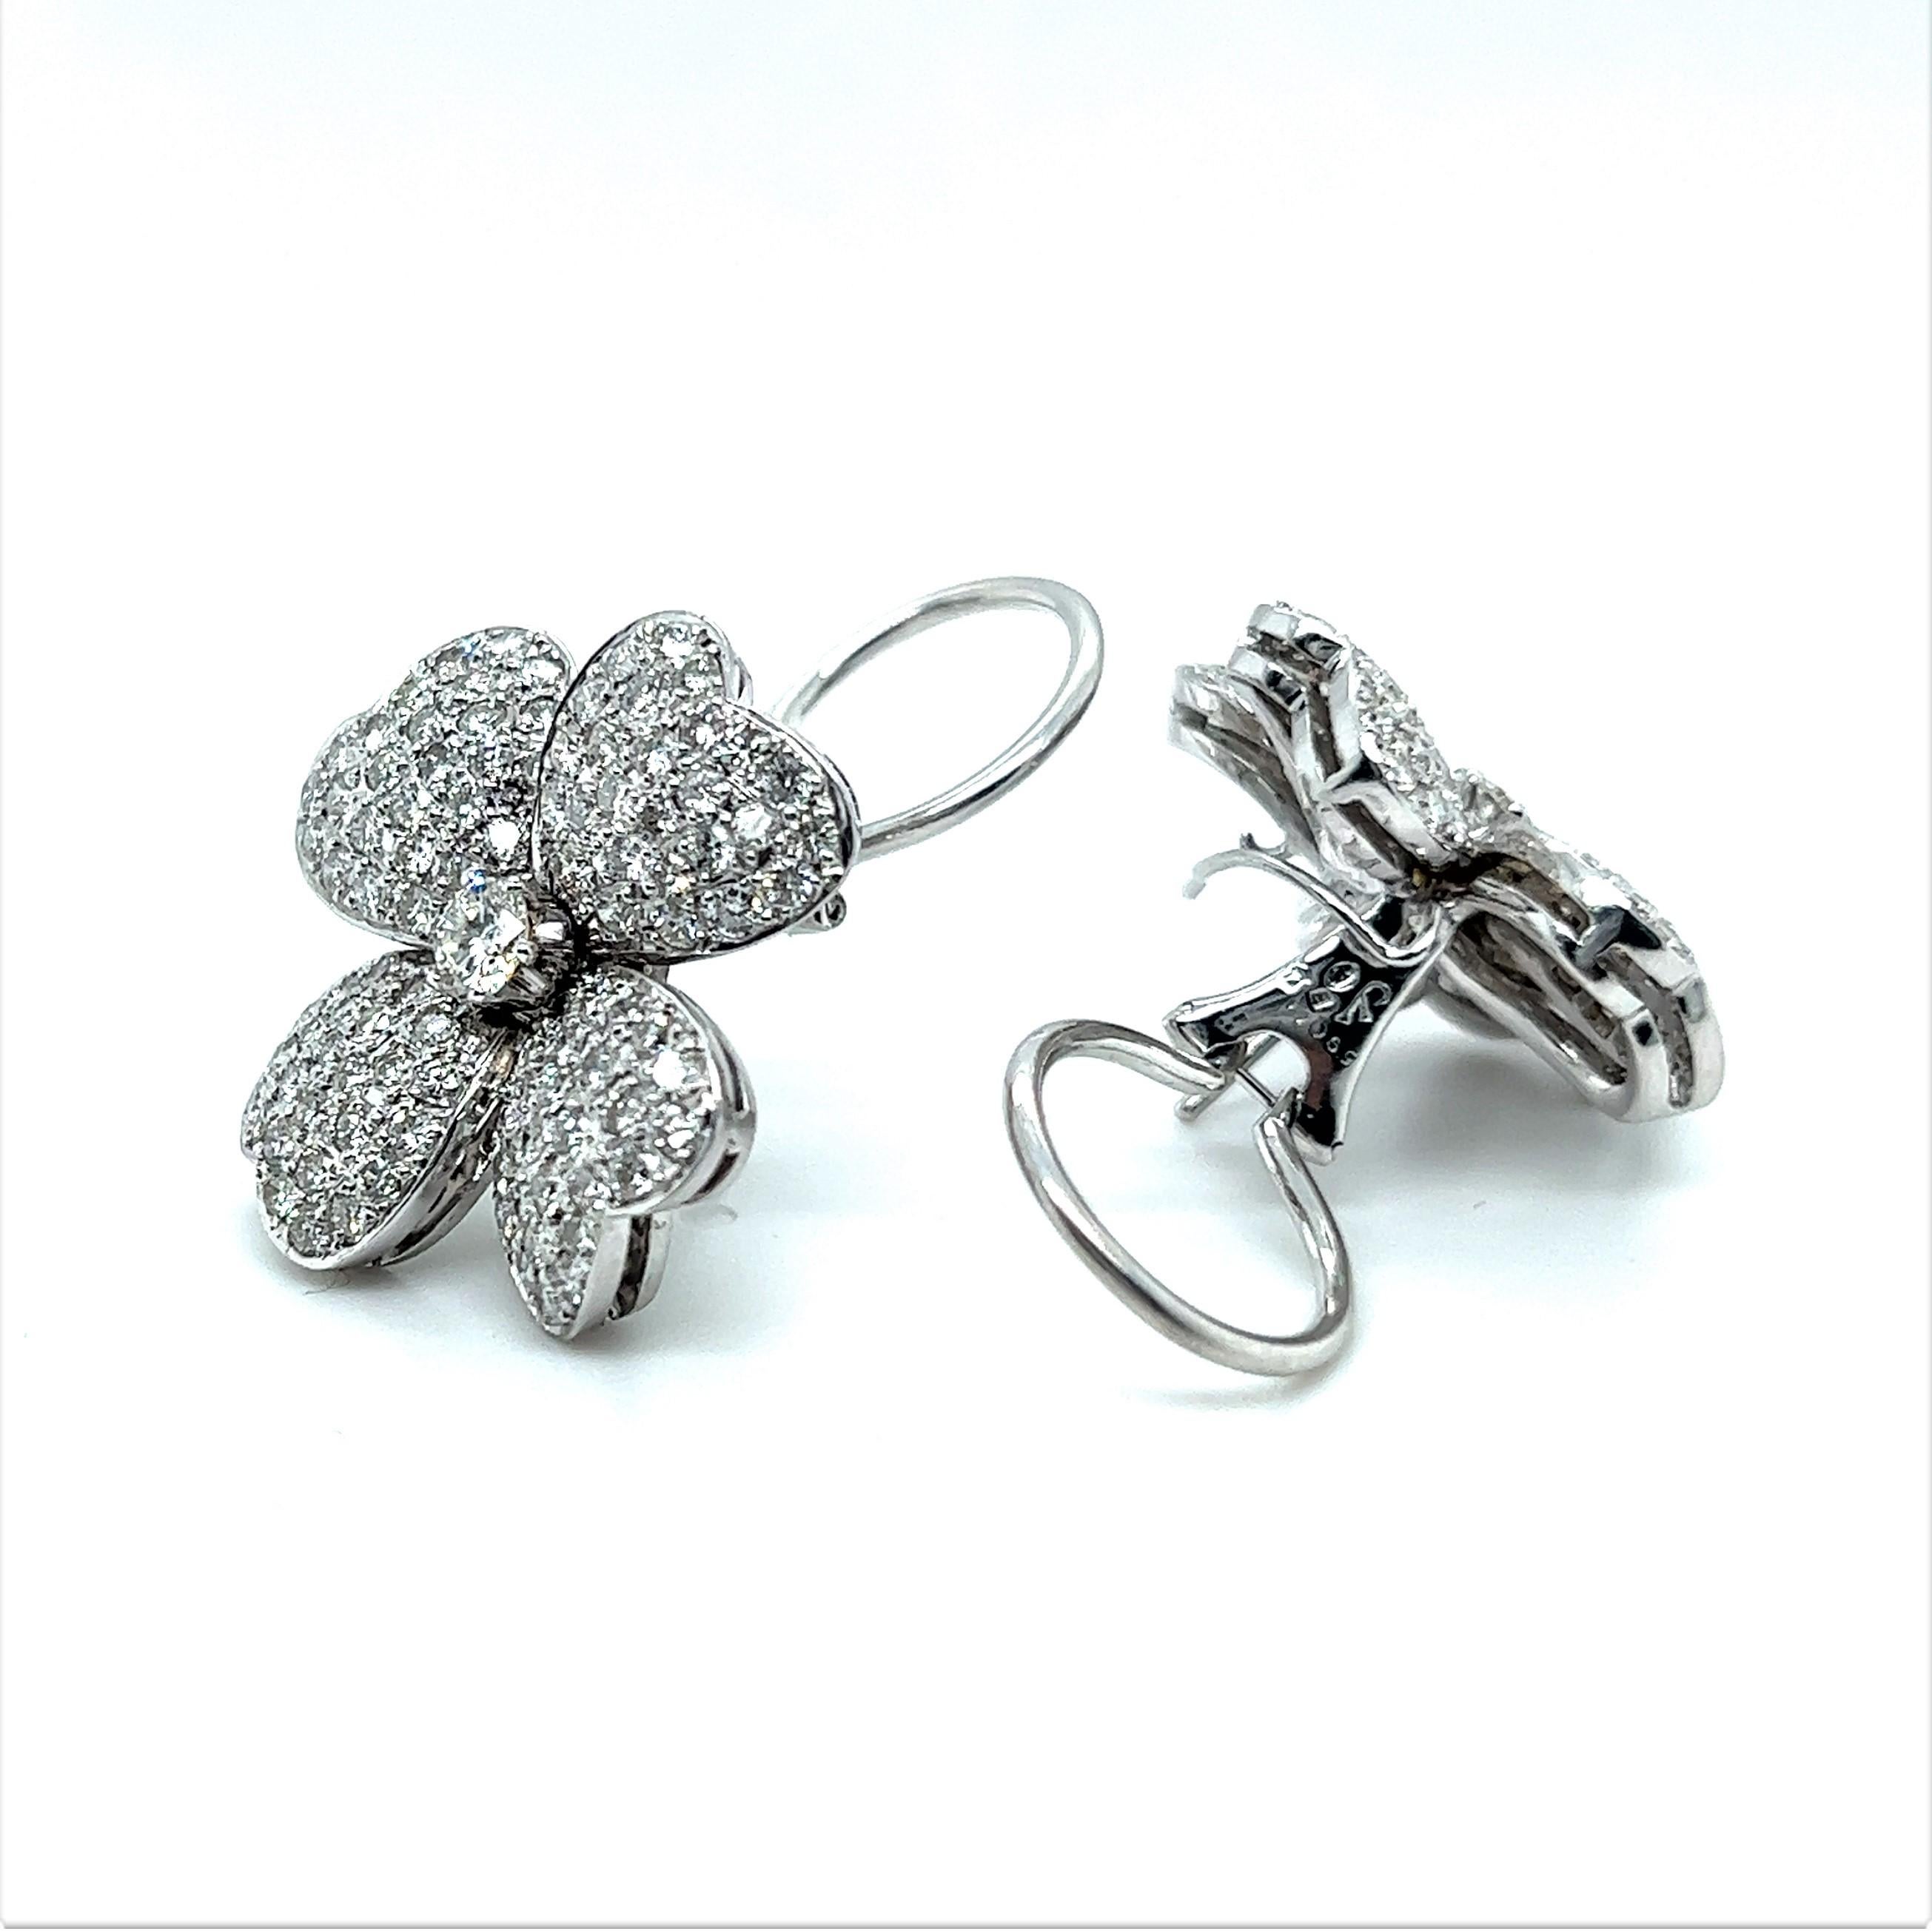 Diamond Flower Earrings in 18 Karat White Gold In Excellent Condition For Sale In Lucerne, CH